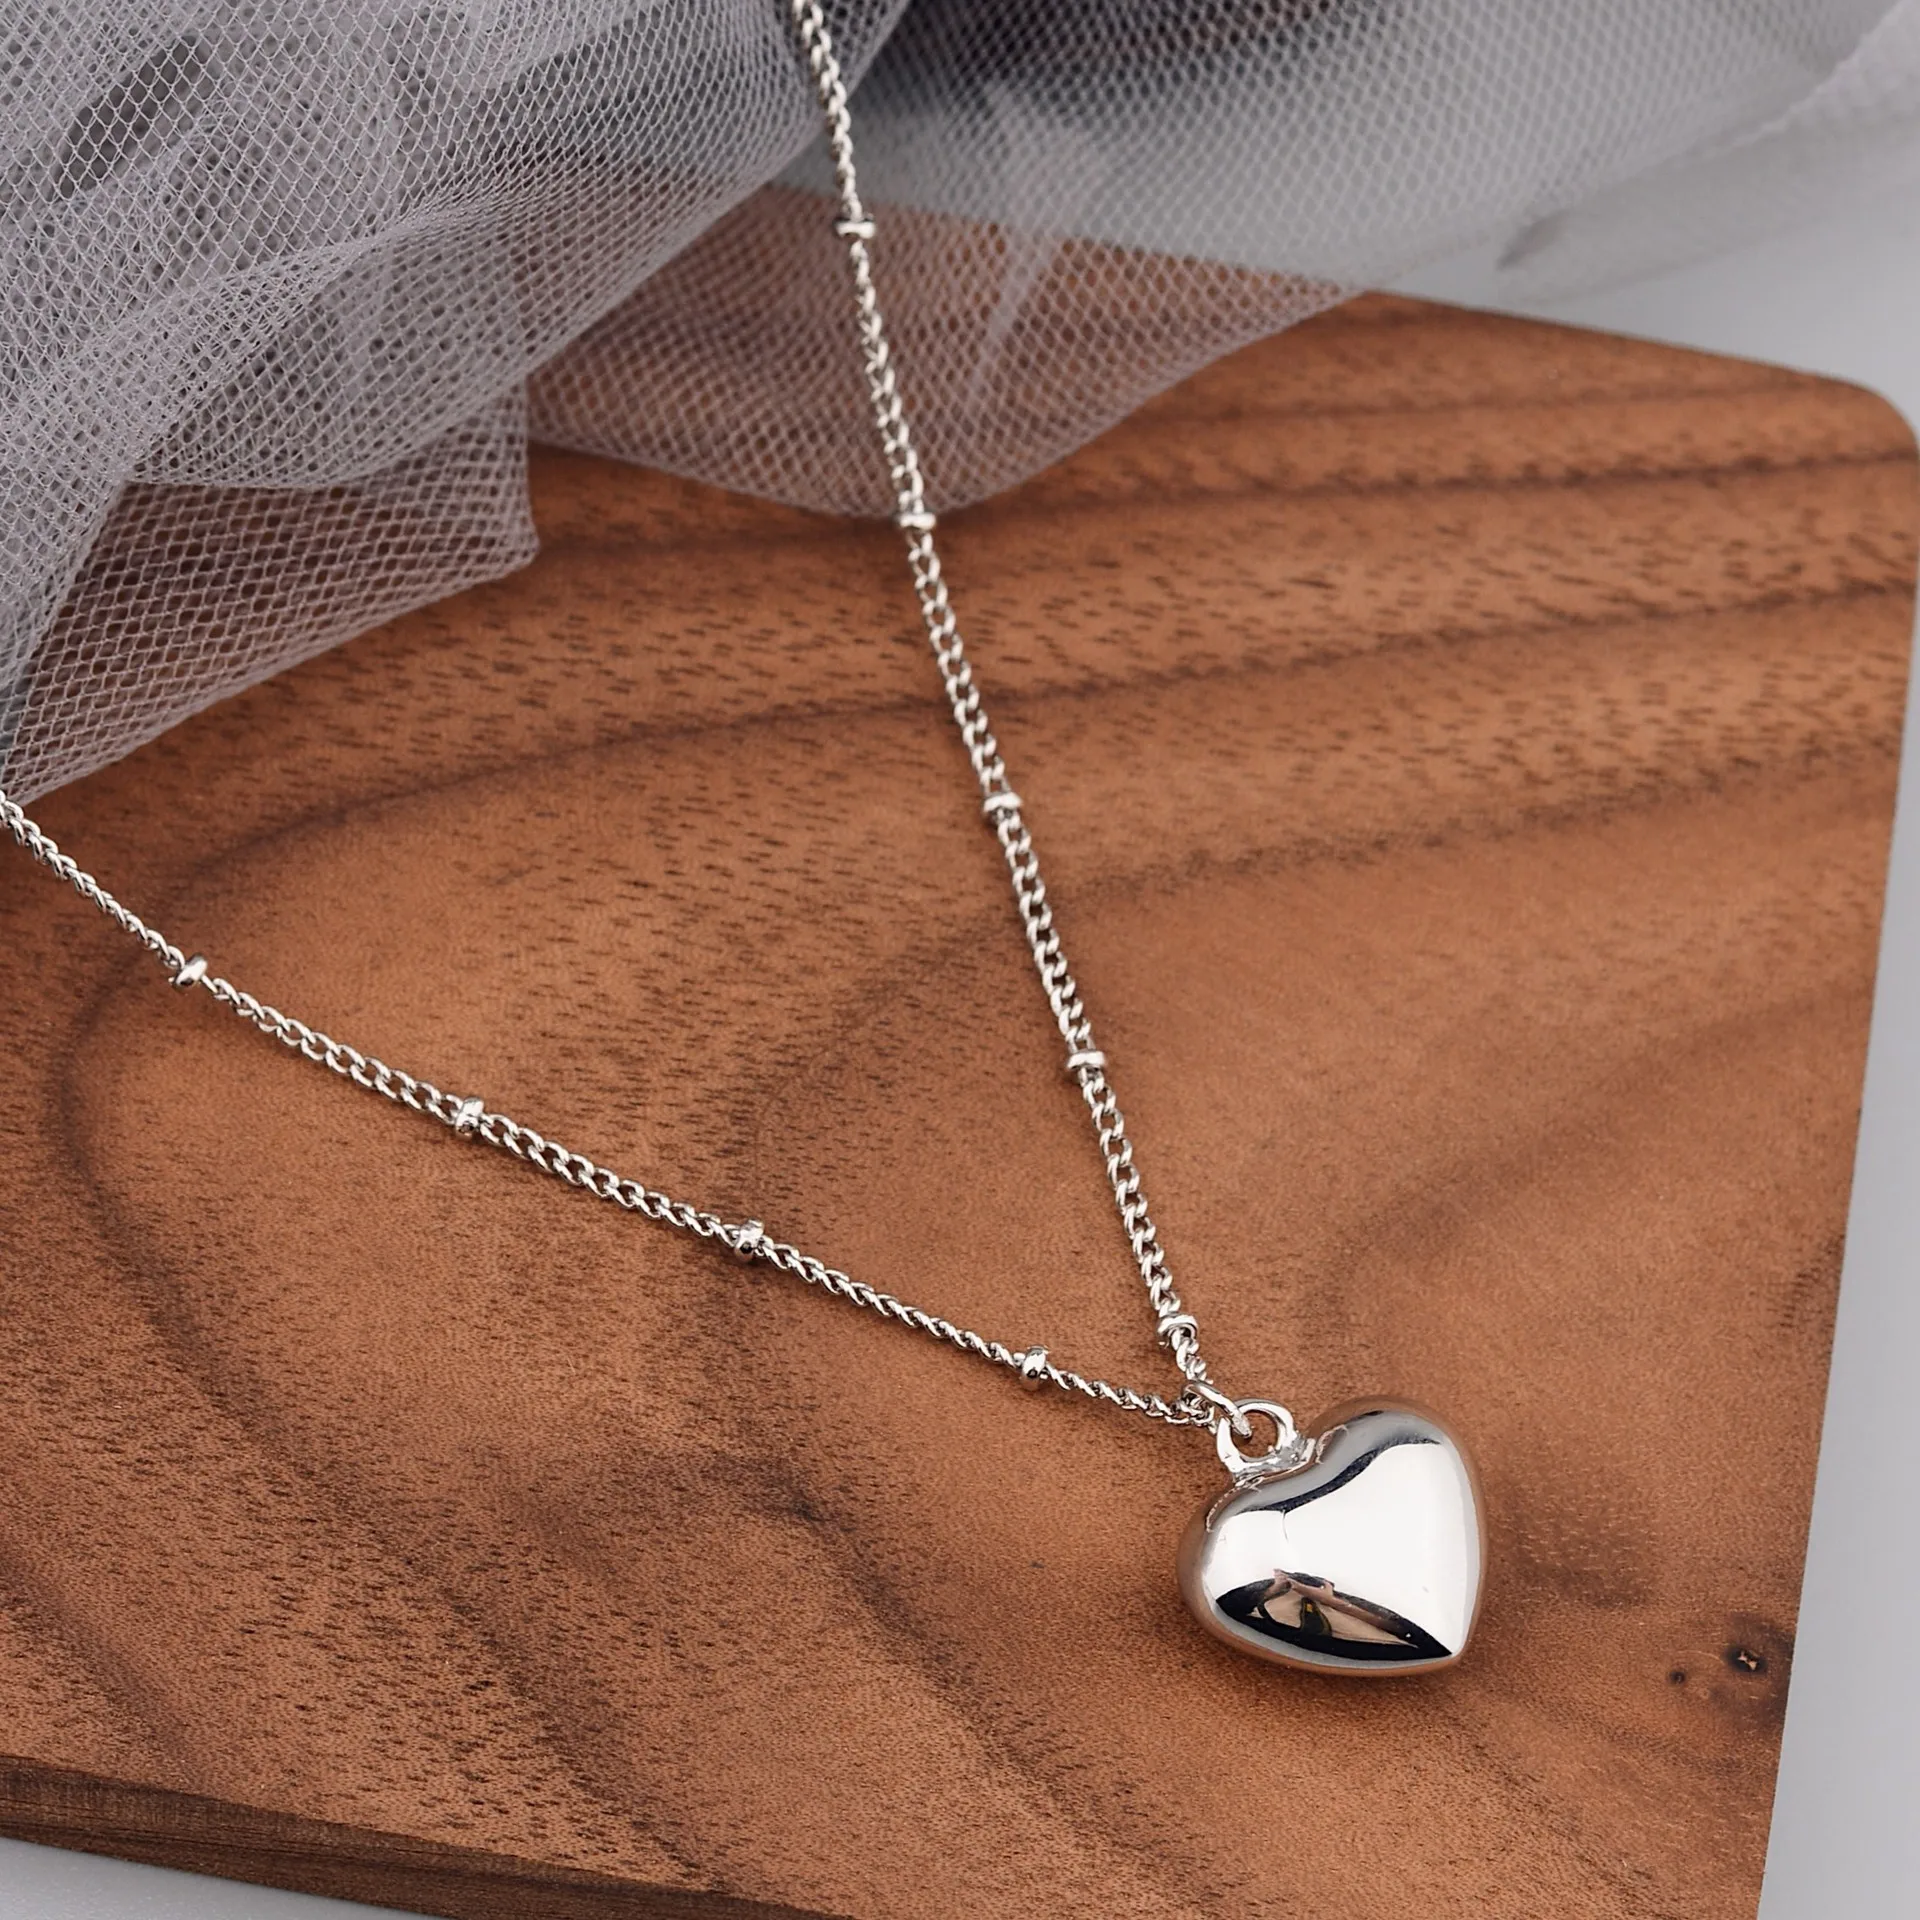 

925 Sterling Silver Heart Chain Choker Necklaces for Women Girls Lover Fine Jewelry Engagement Wedding Party Birthday Gift